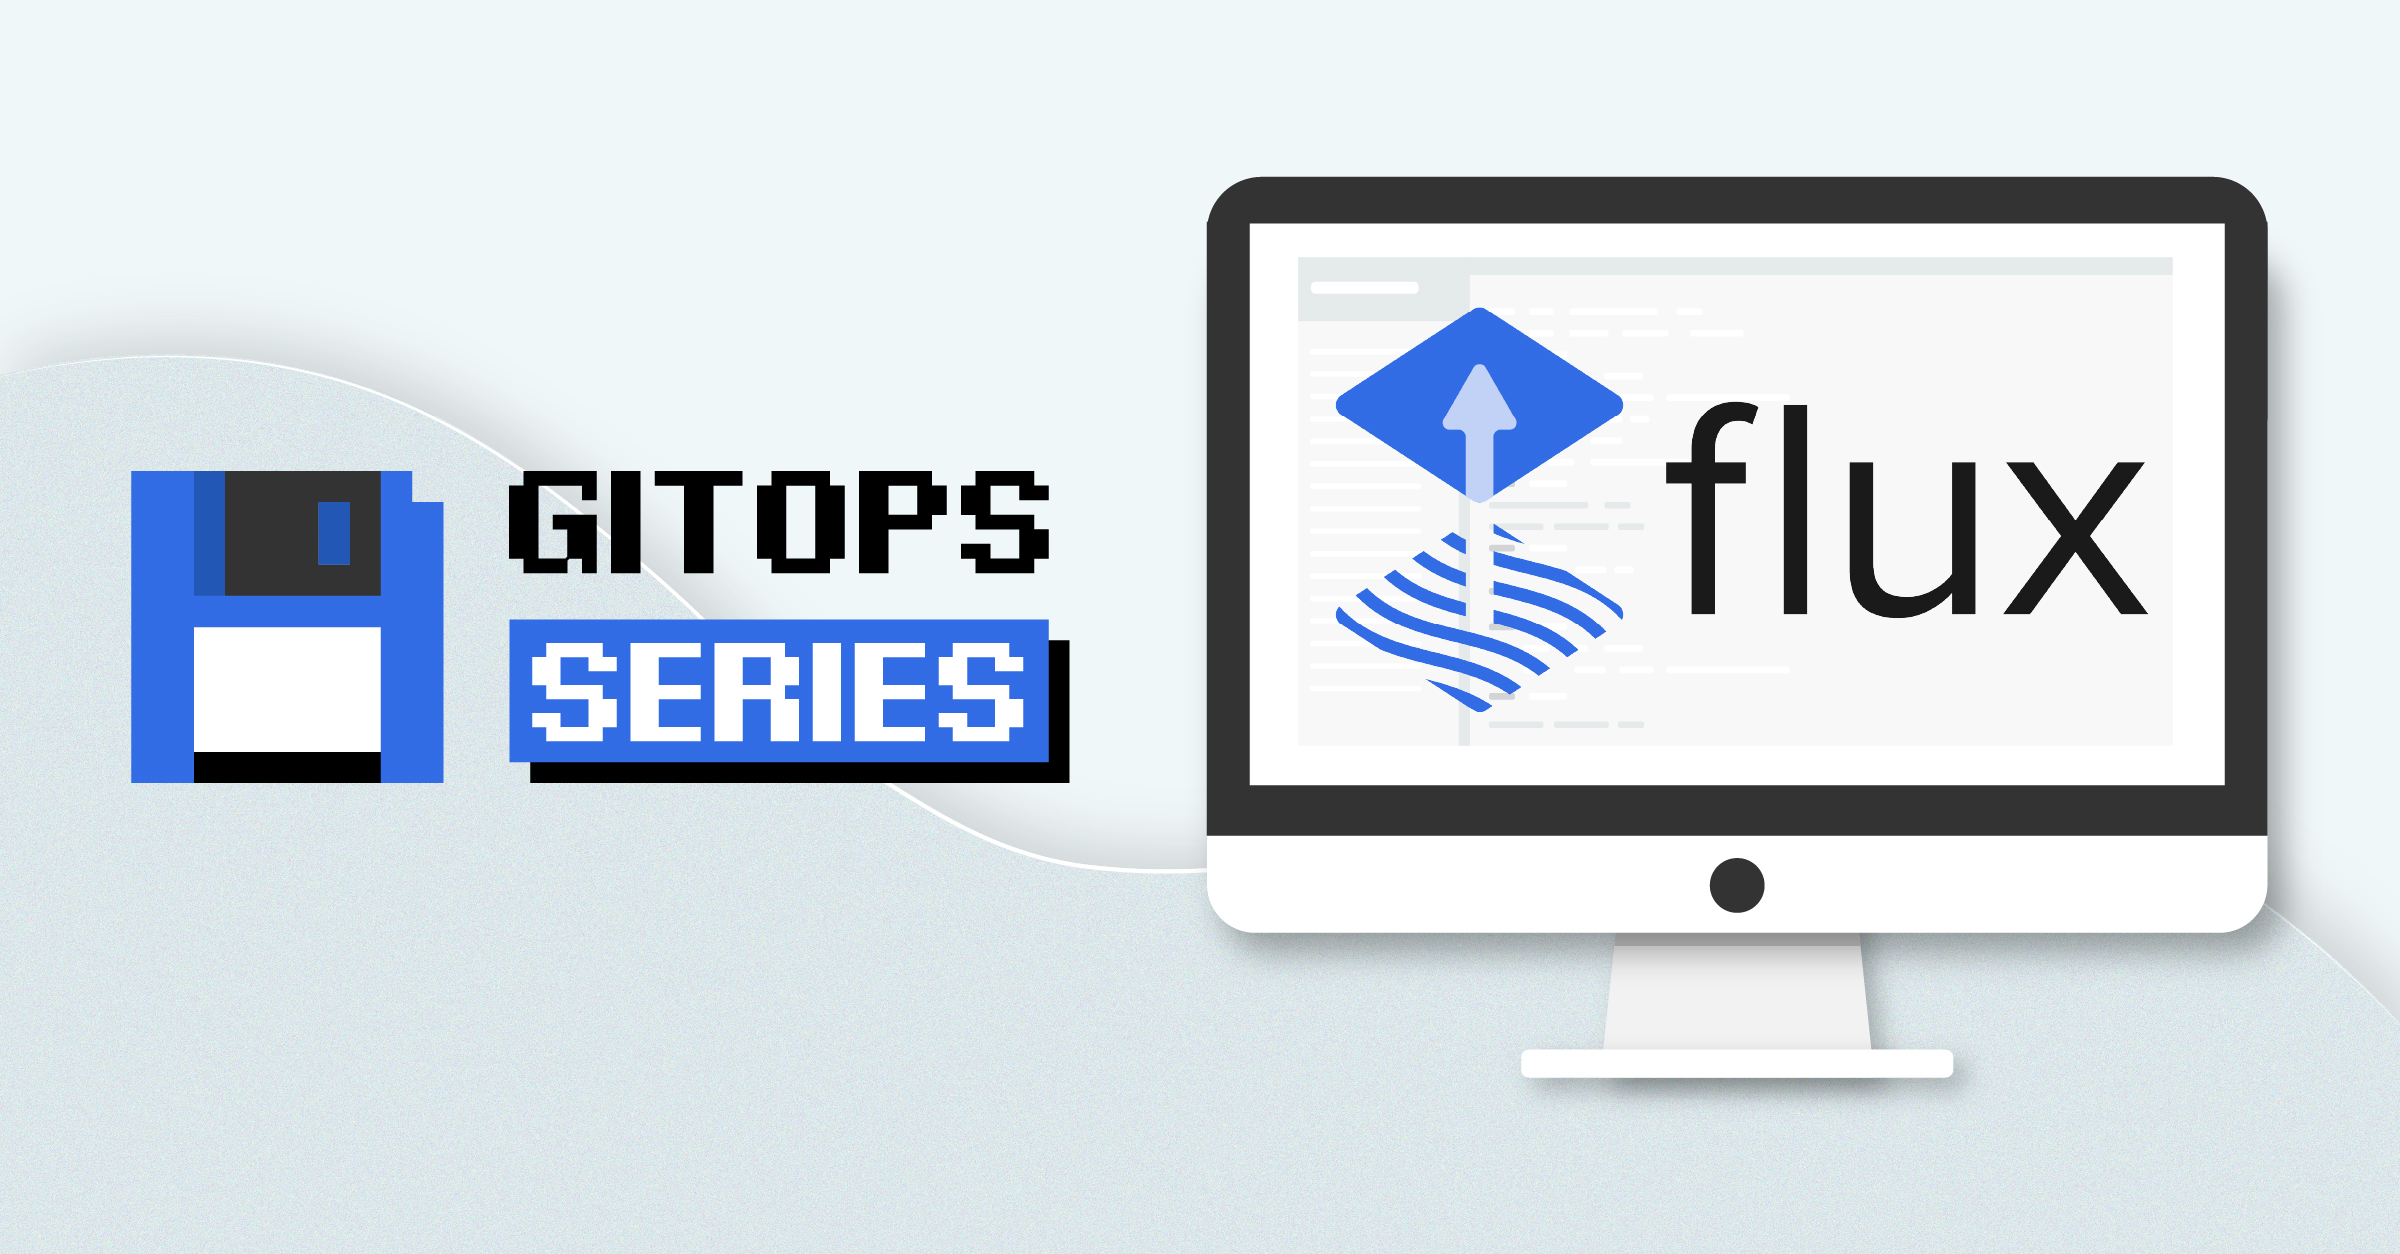 GitOps with Flux image thumbnail